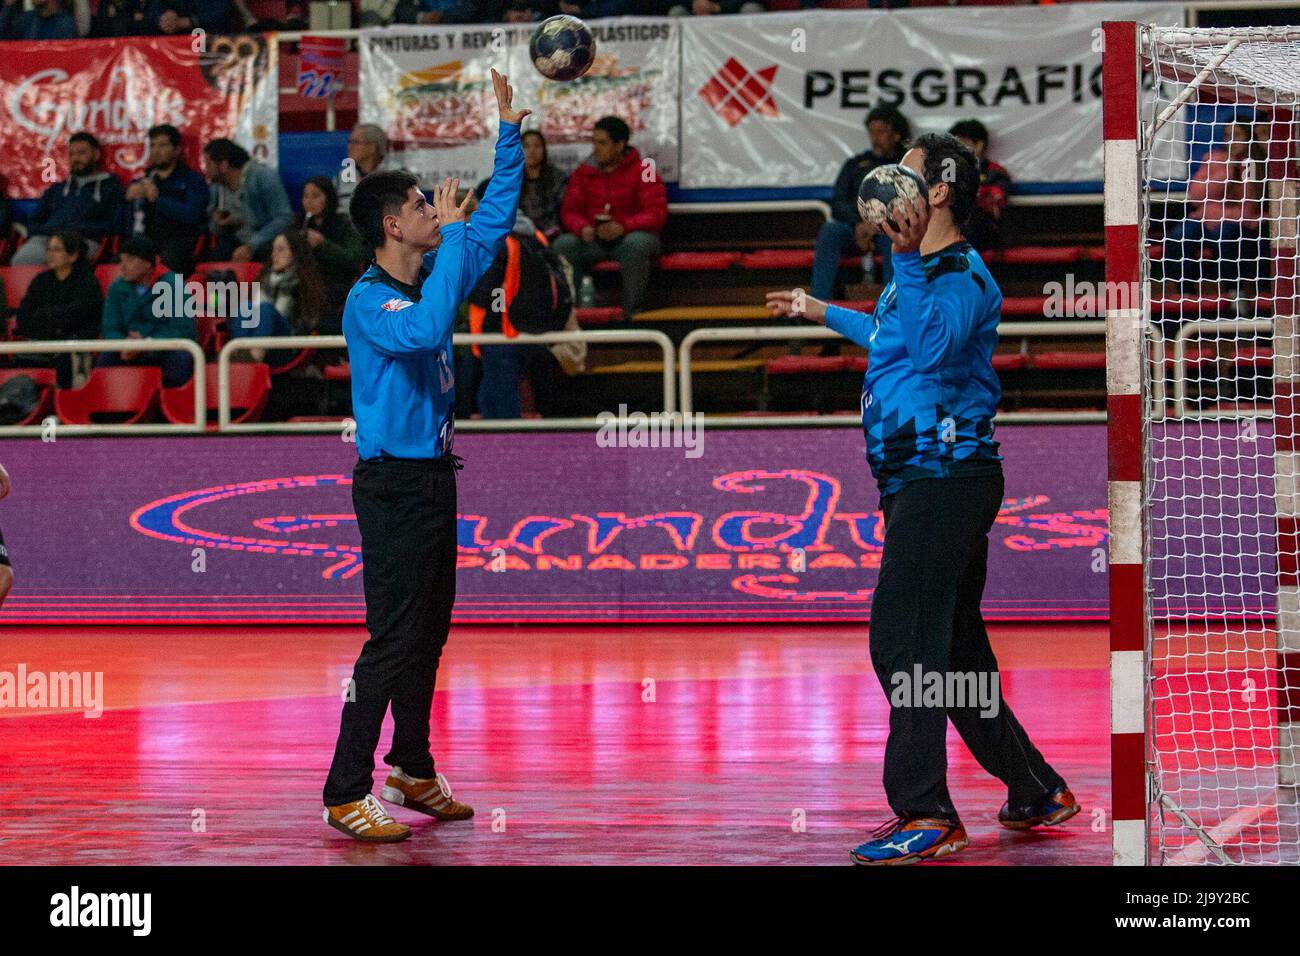 Villa Ballester, Argentina. May 25, 2022. Ovalle Balonmano (CHL) goalkeepers Damian CHINCHON and Rene CIFUENTES at Estadio SAG Villa Ballester in Villa Ballester, Buenos Aires, Argentina. Credit: Fabian Lujan/ASN Media/Alamy Live News Stock Photo